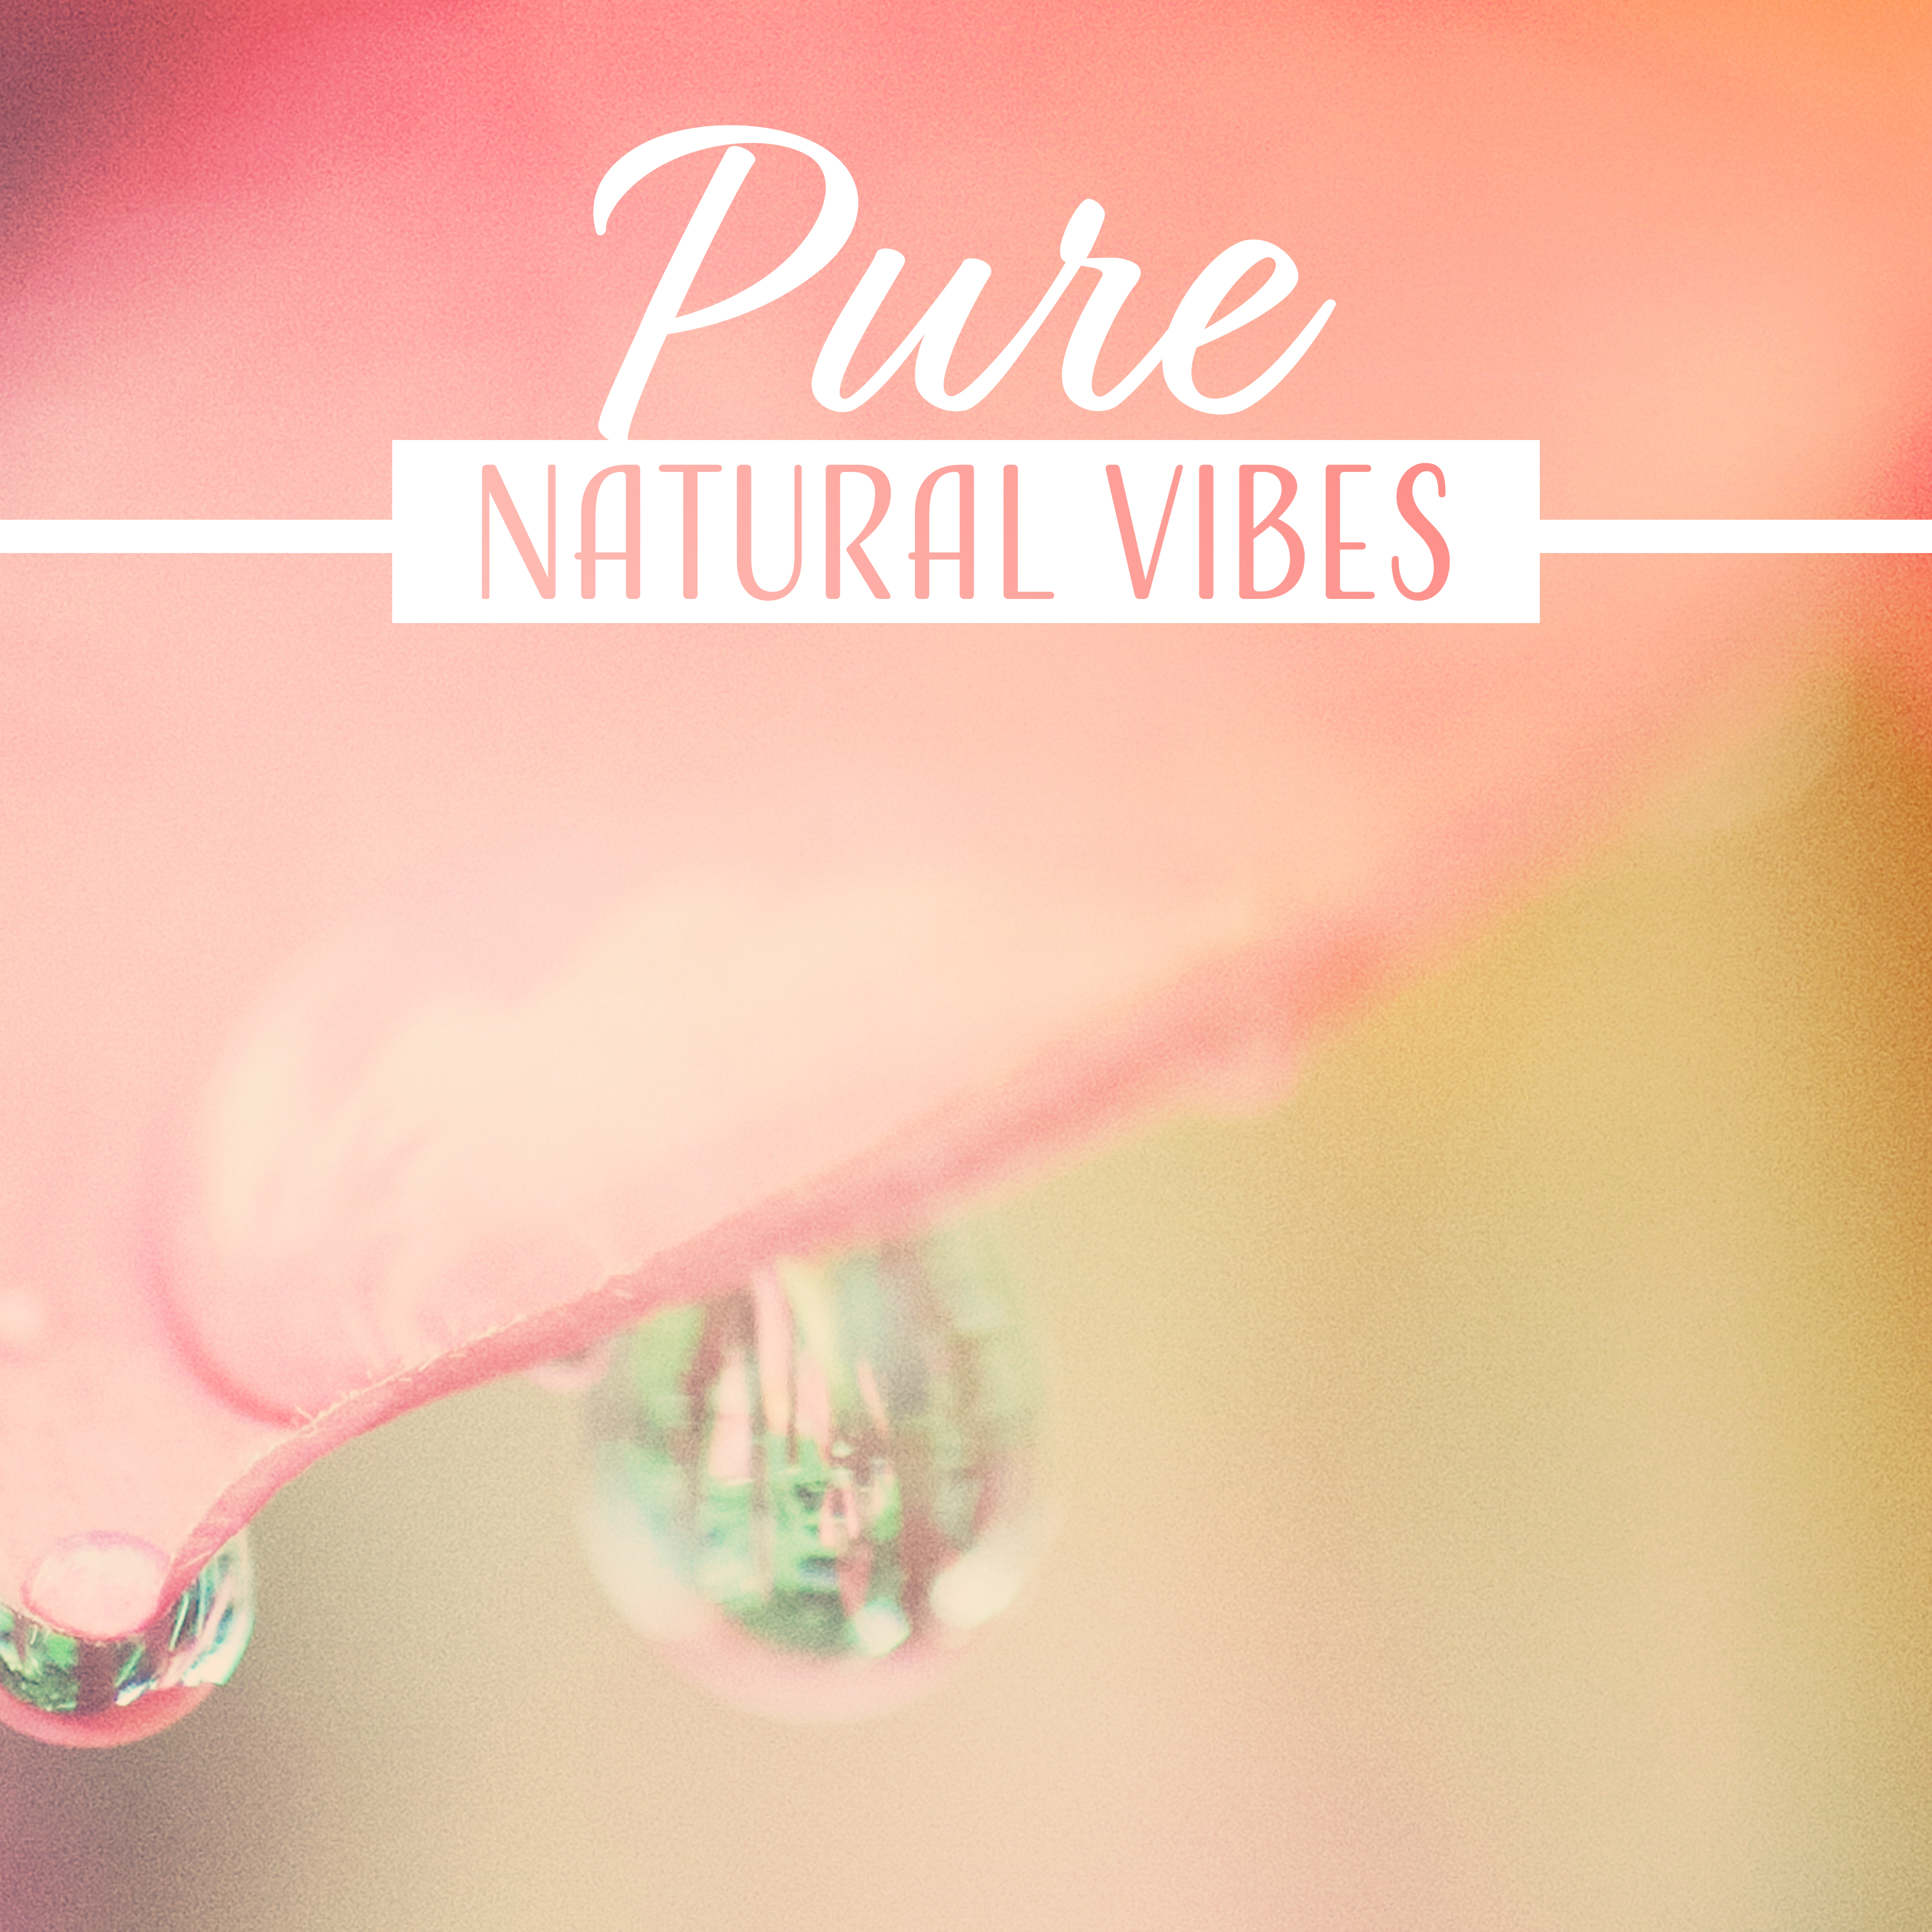 Pure Natural Vibes